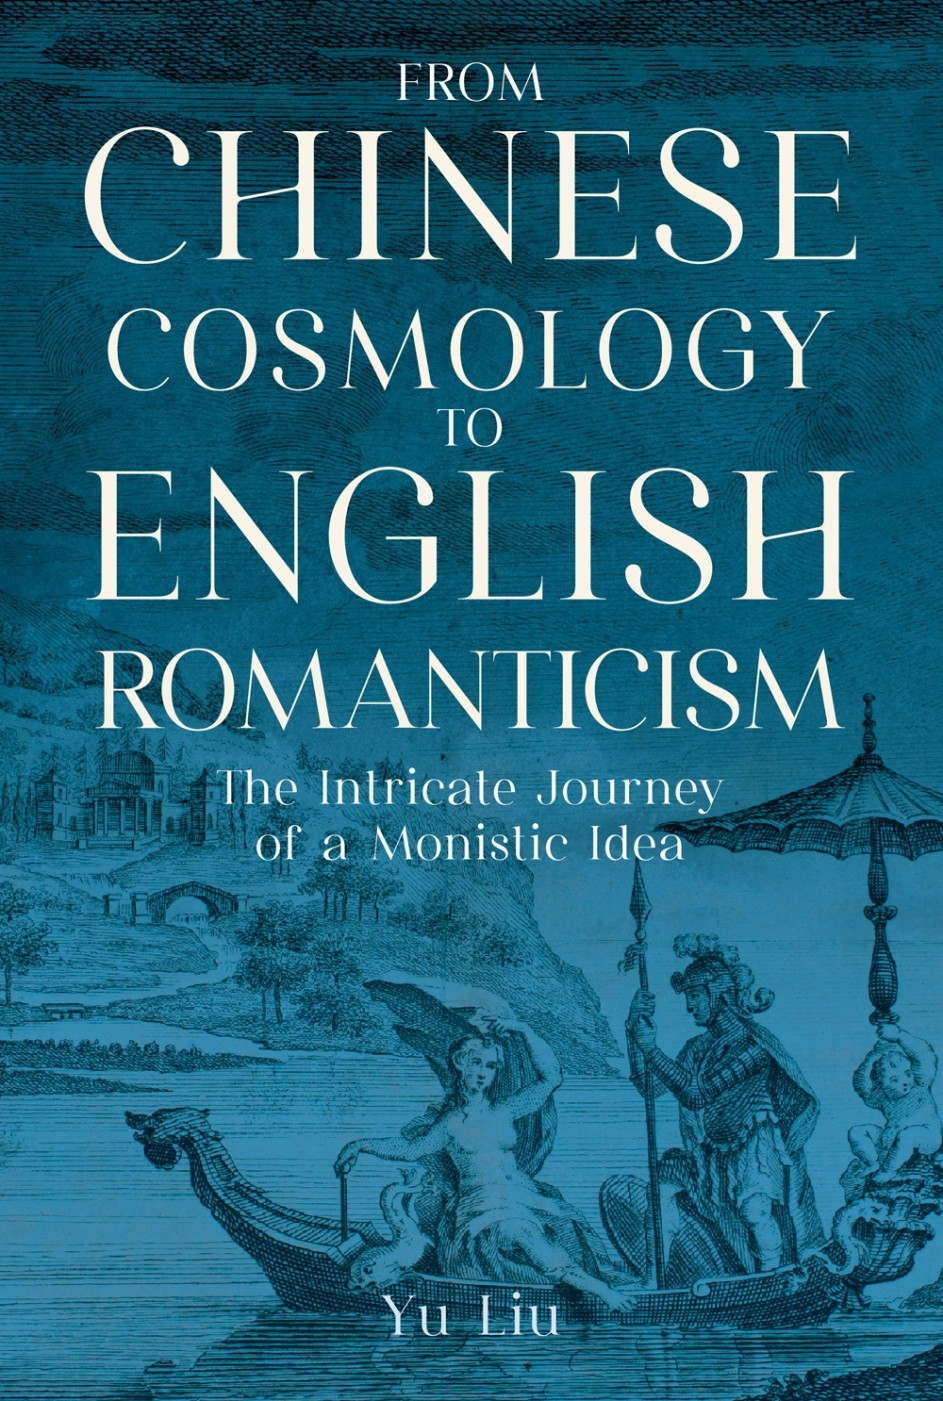 From Chinese Cosmology to Engl...